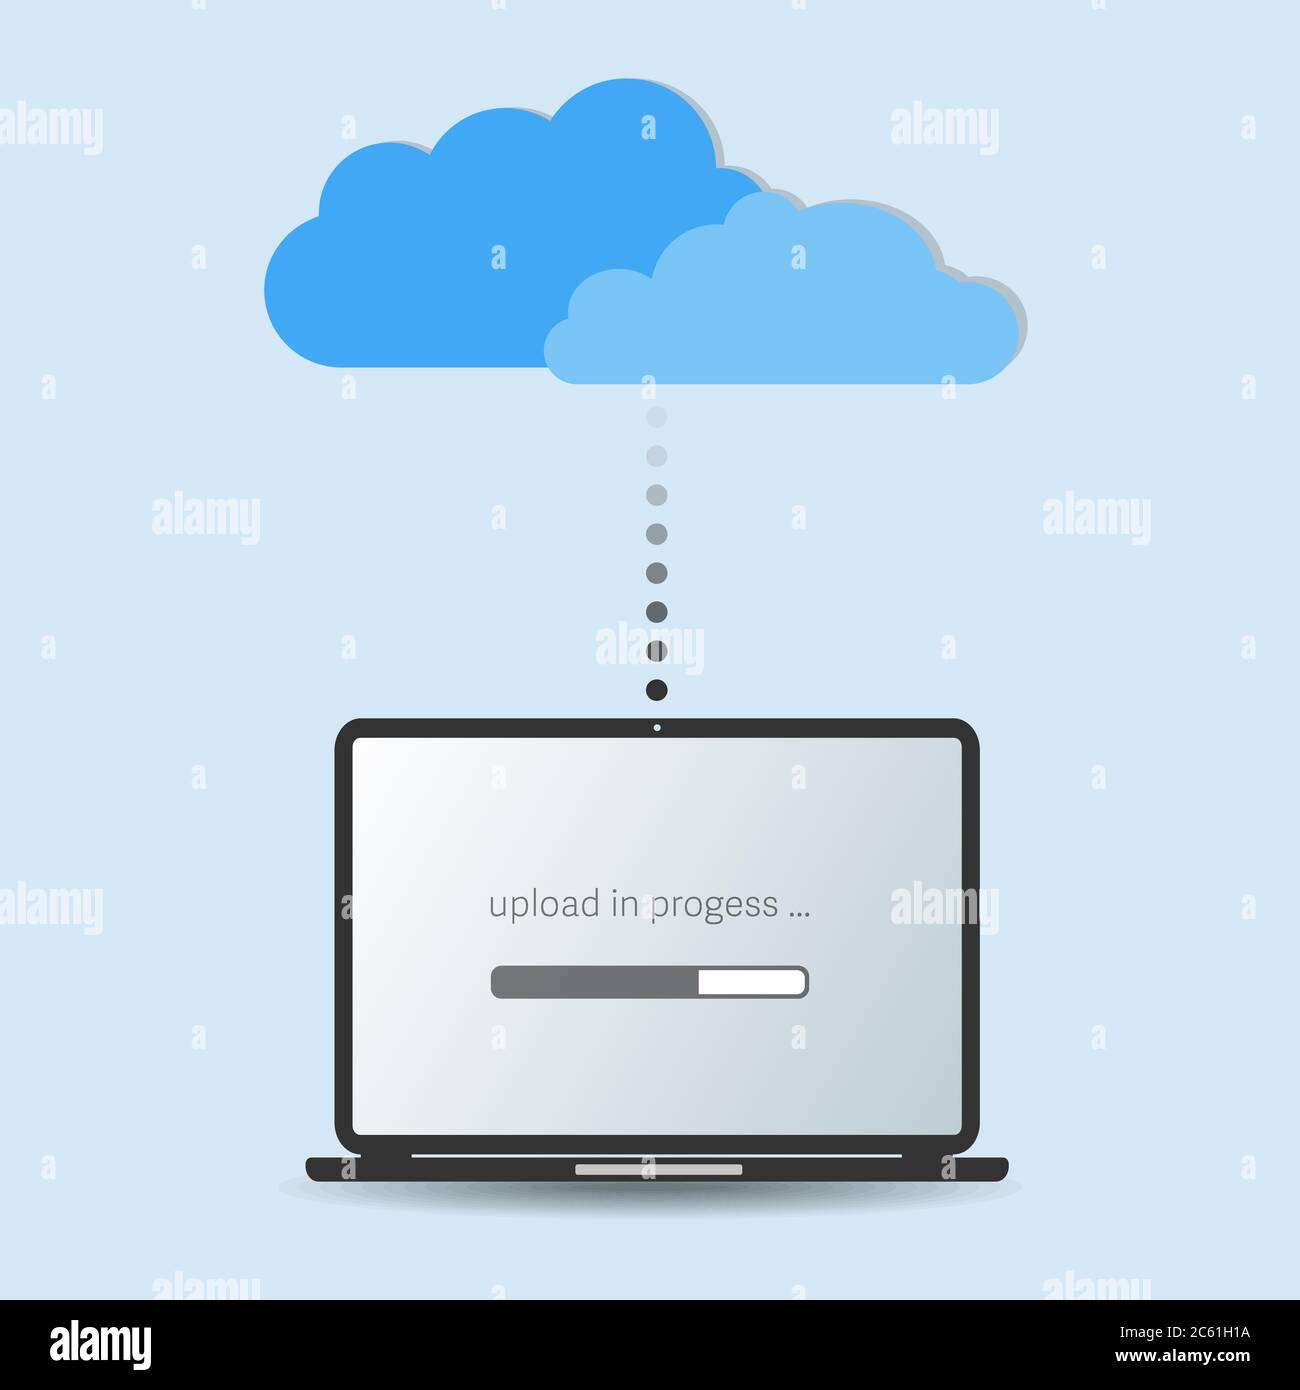 cloud storage service concept, uploading data from local laptop computer to cloud vector illustration Stock Vector